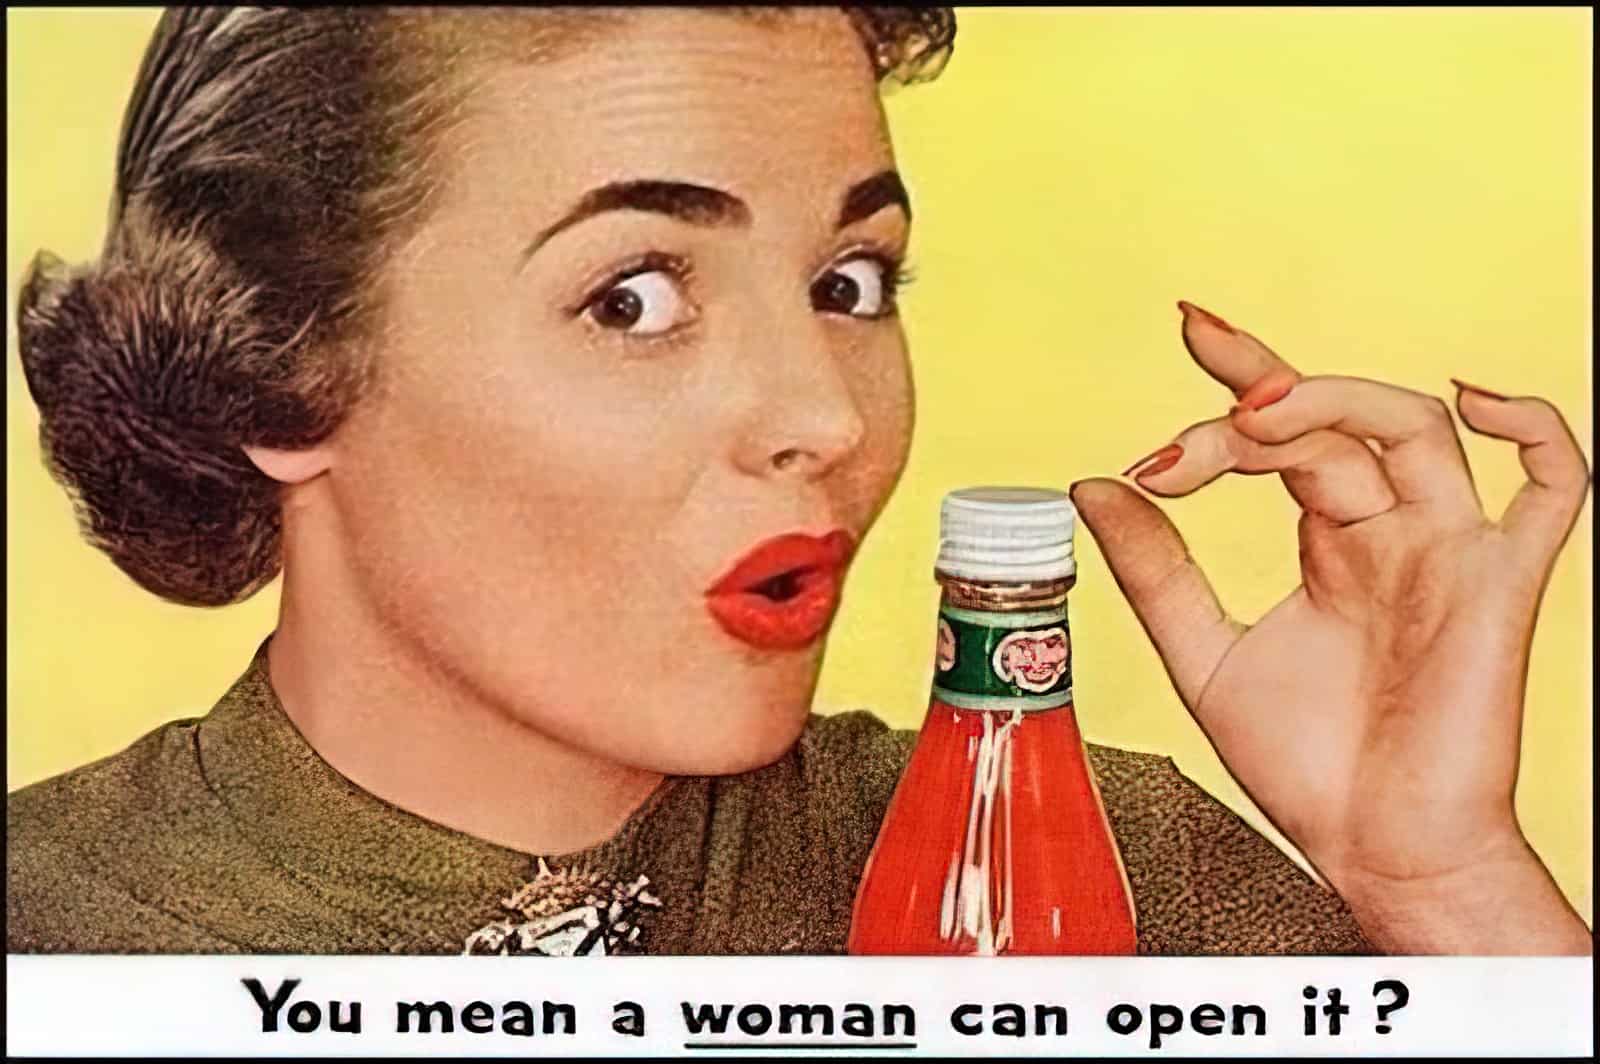 Sexist Ads from the 50s